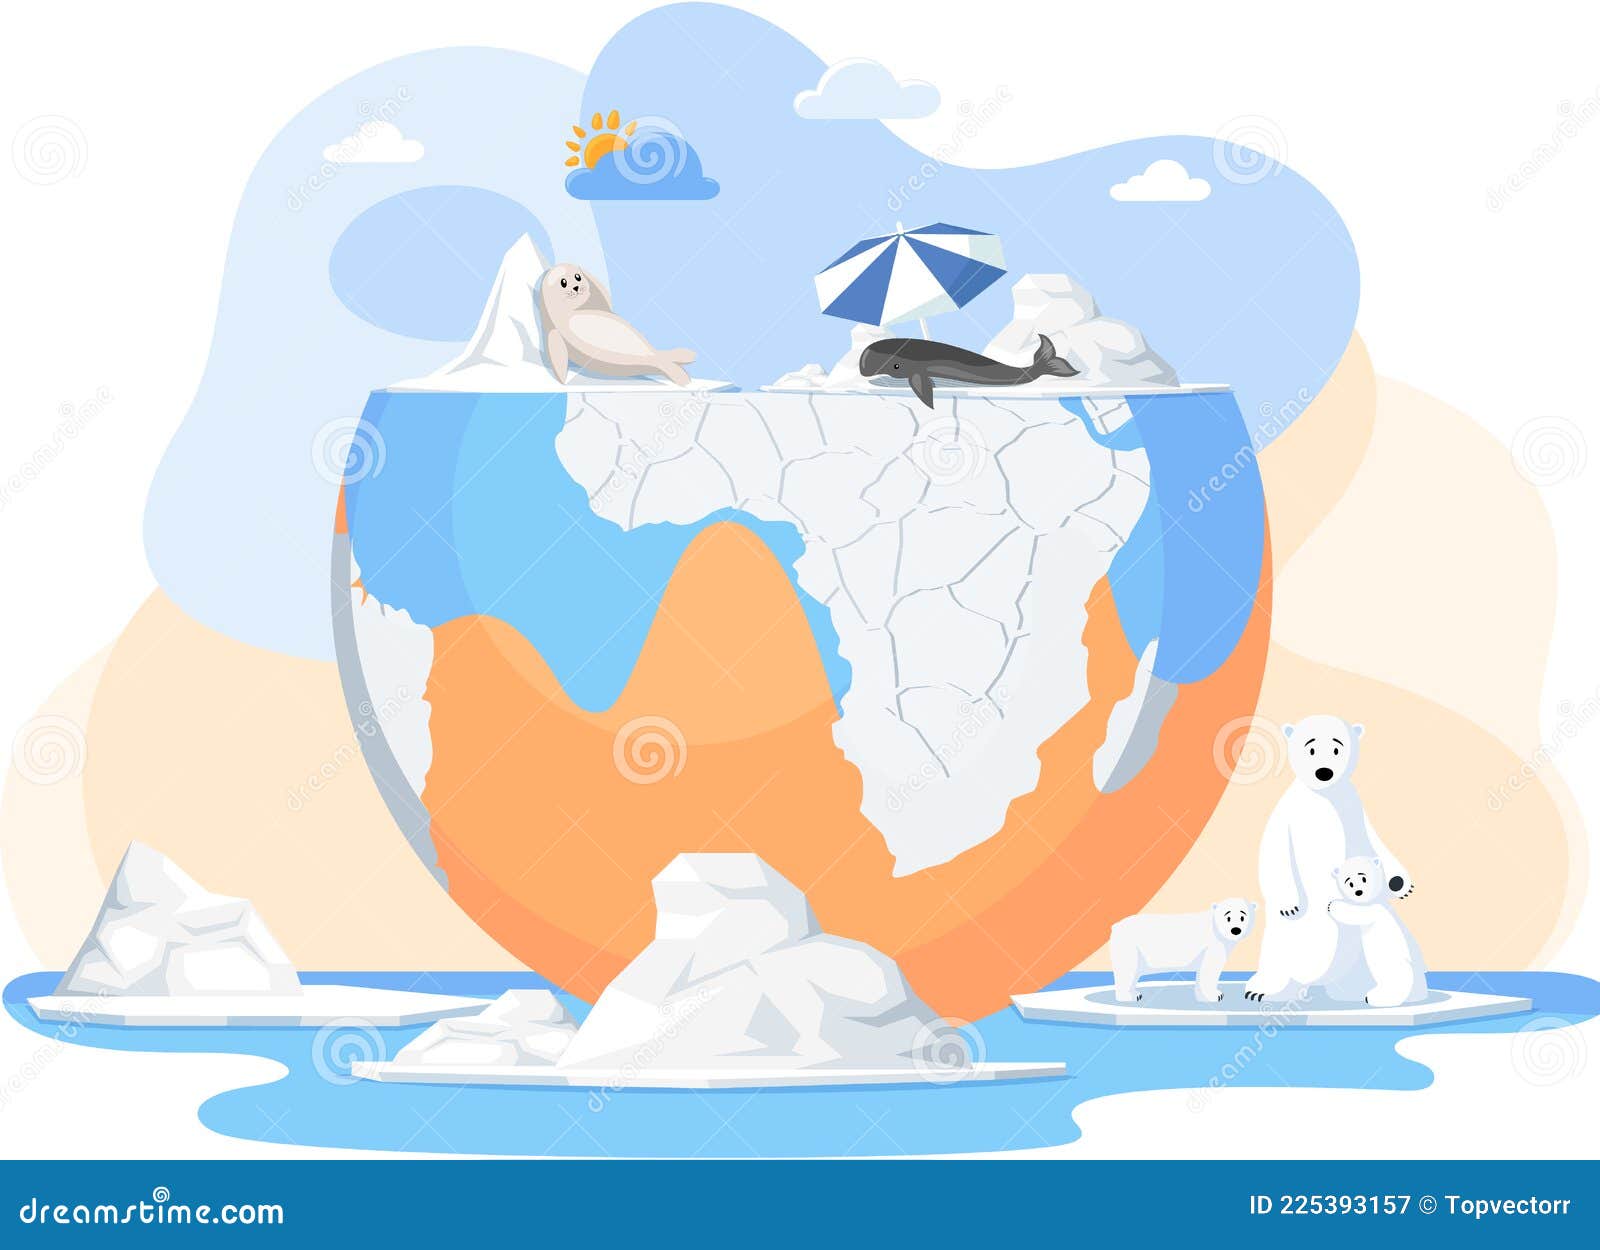 Global Warming and Climate Change on Earth Concept. Polar Animals Suffer  from Melting Glaciers Stock Vector - Illustration of abstract, brown:  225393157